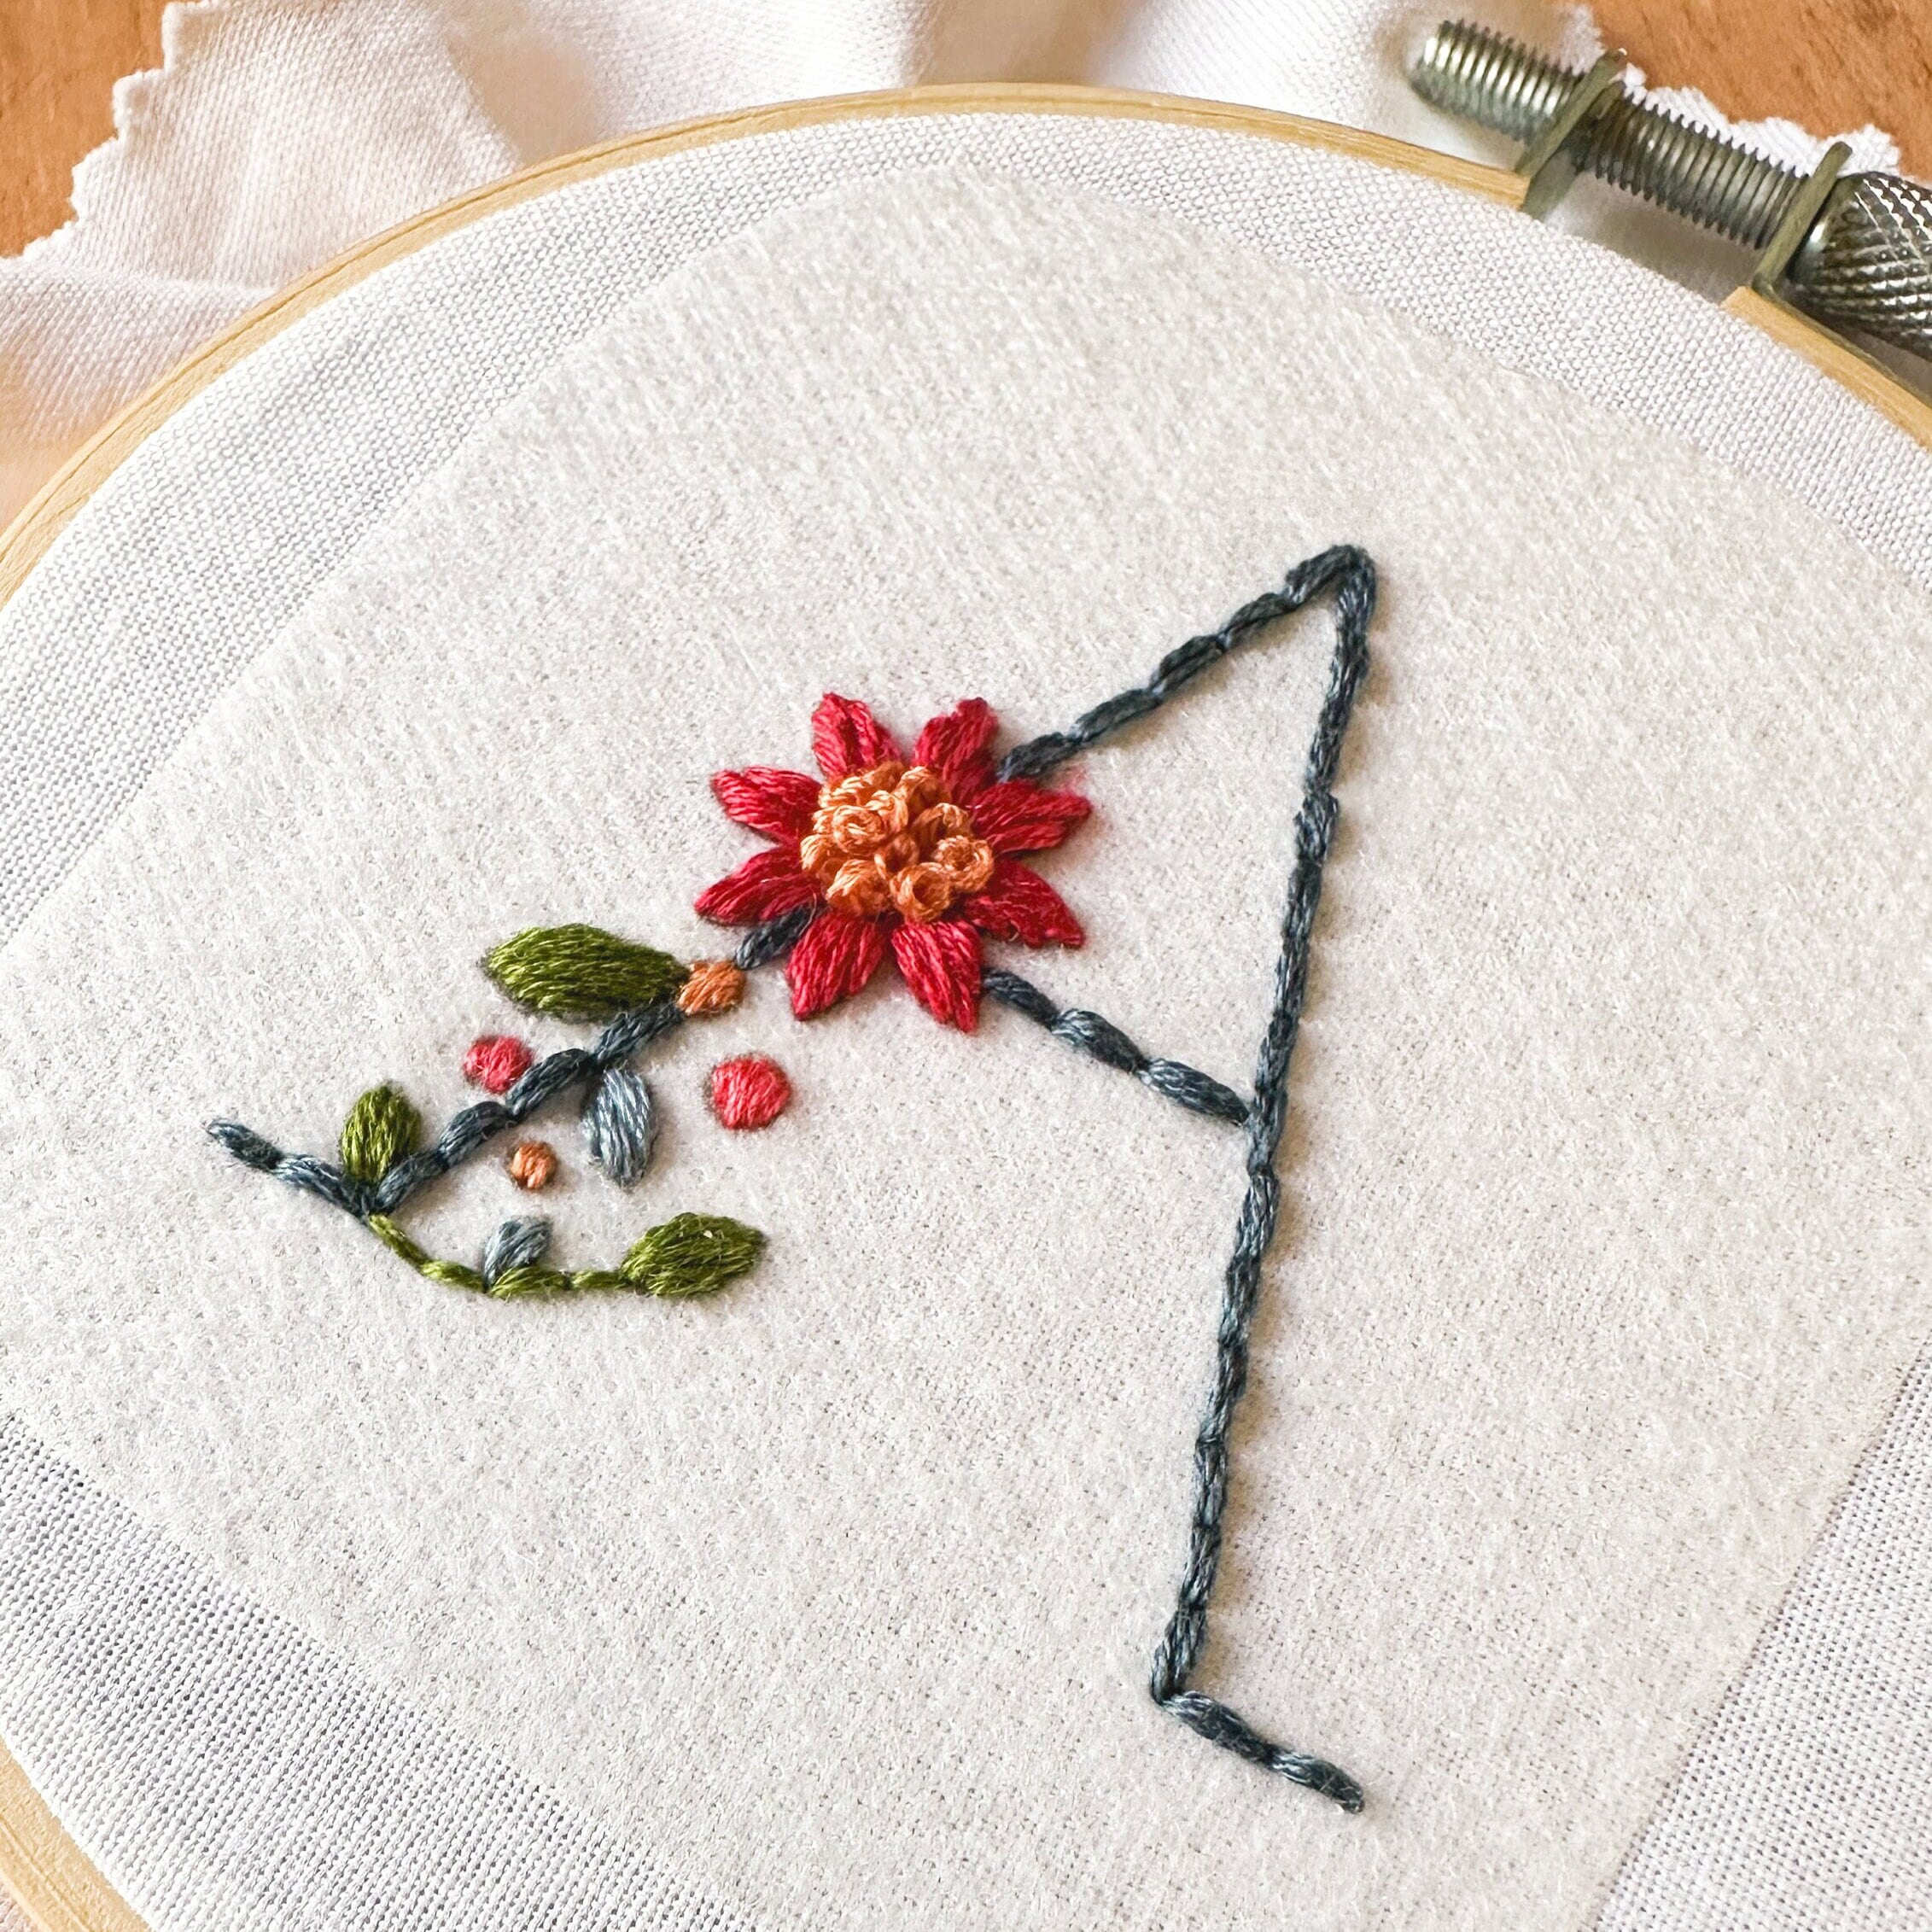 How to choose embroidery needle: 4 conditions to consider - Stitch Floral